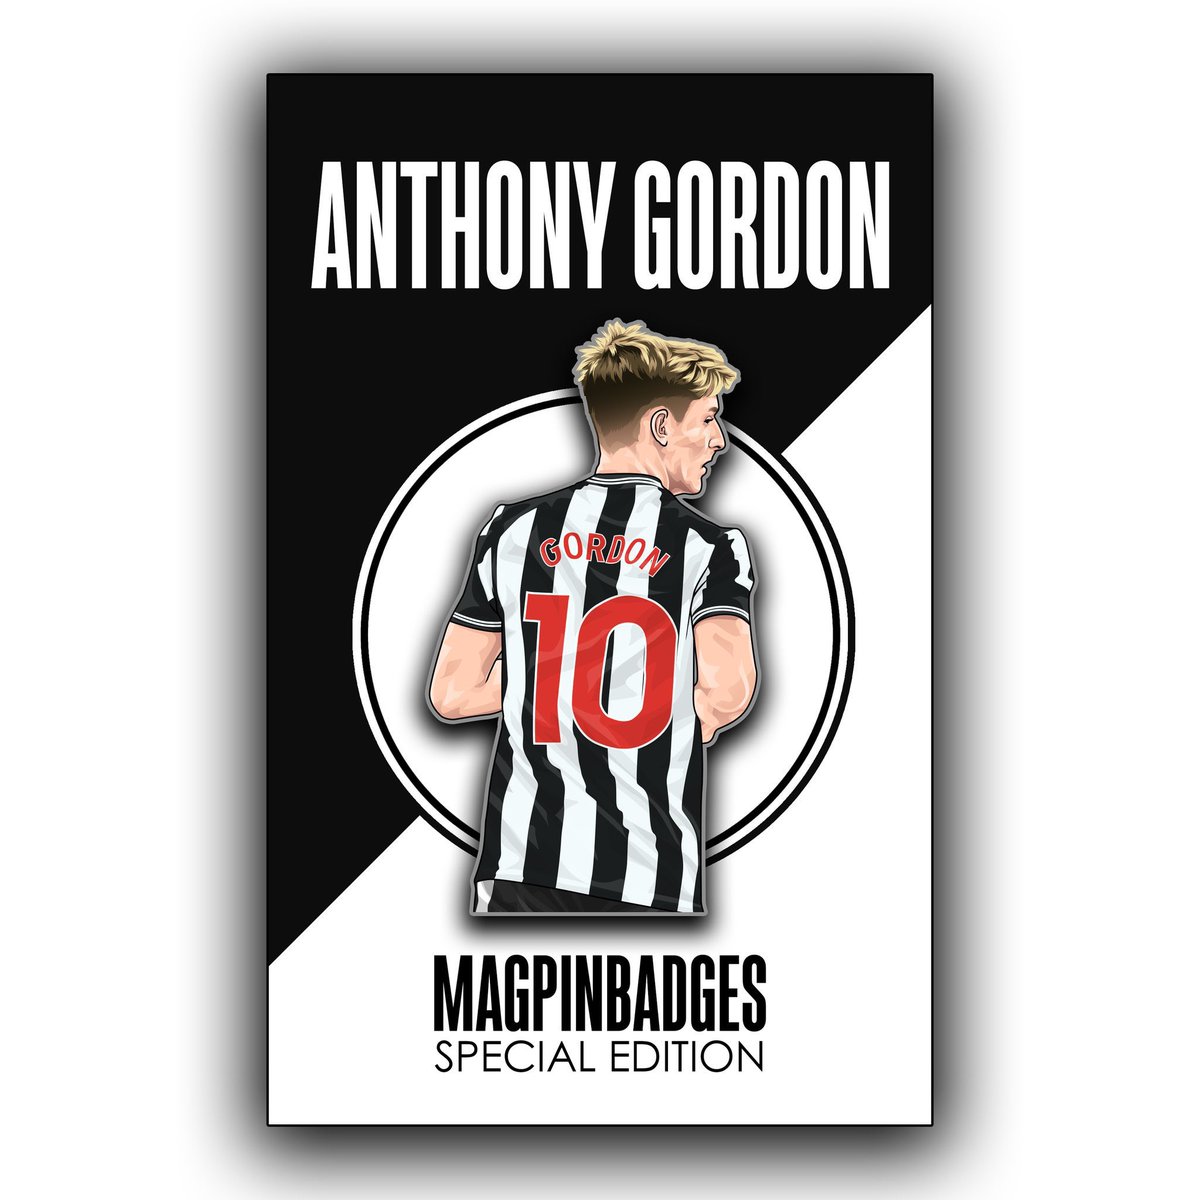 Anthony Gordon pin badges are available to order NOW! 📌⚫️⚪️ Thanks to everyone who RT’d, the winner of the comp is @stulewis03 - congrats! DM to claim In stock, ready for immediate dispatch. Delivered in time for Xmas Order from link below ⬇️ #NUFC magpinbadges.bigcartel.com